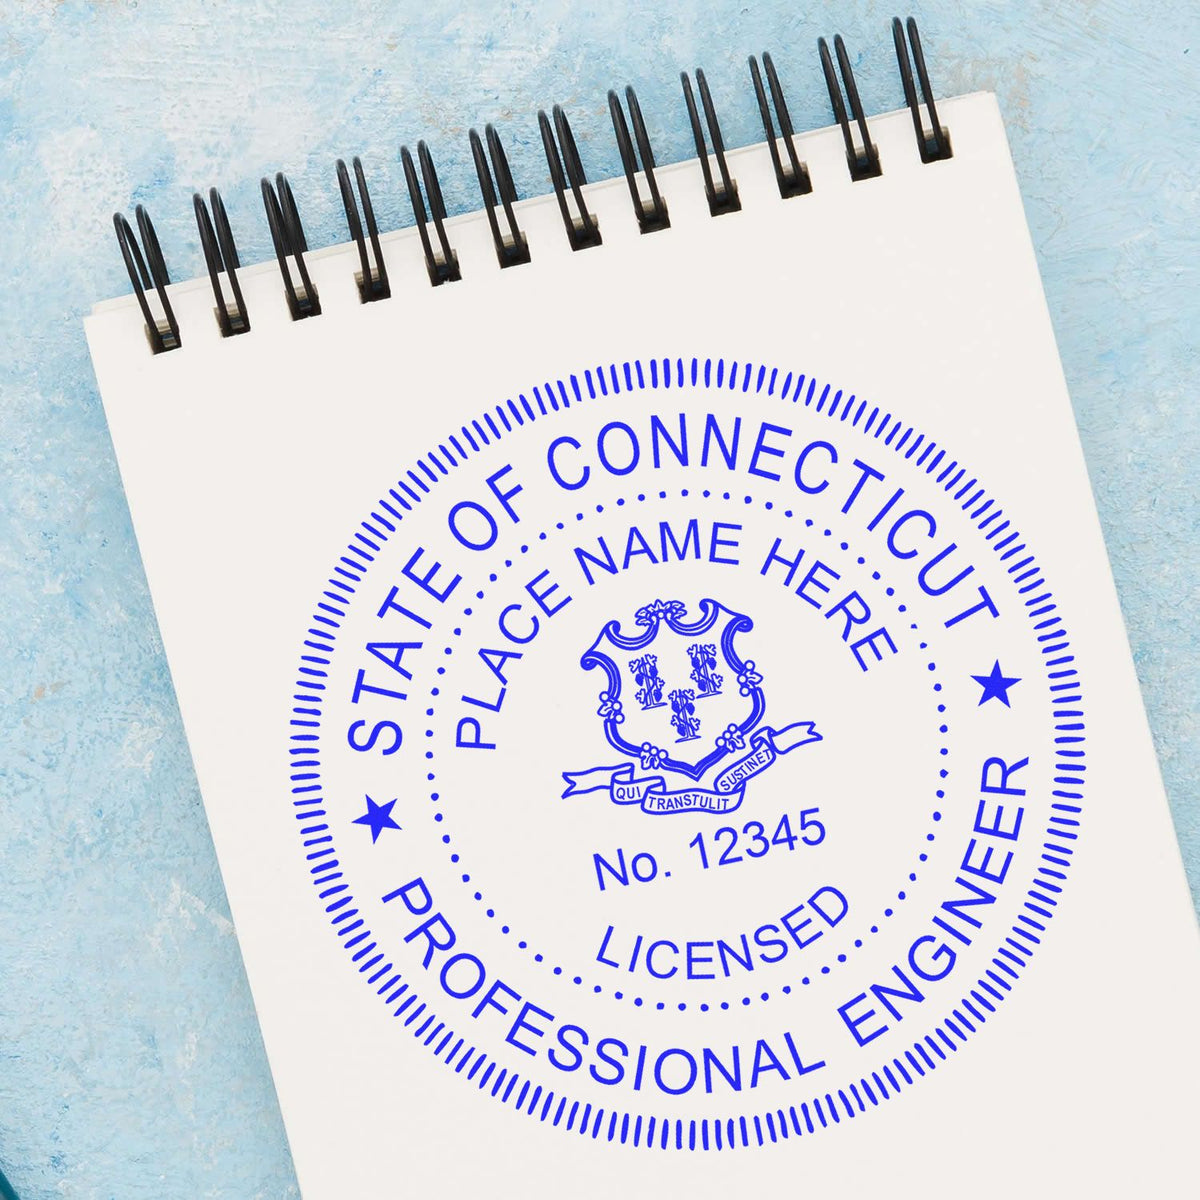 The Digital Connecticut PE Stamp and Electronic Seal for Connecticut Engineer stamp impression comes to life with a crisp, detailed photo on paper - showcasing true professional quality.